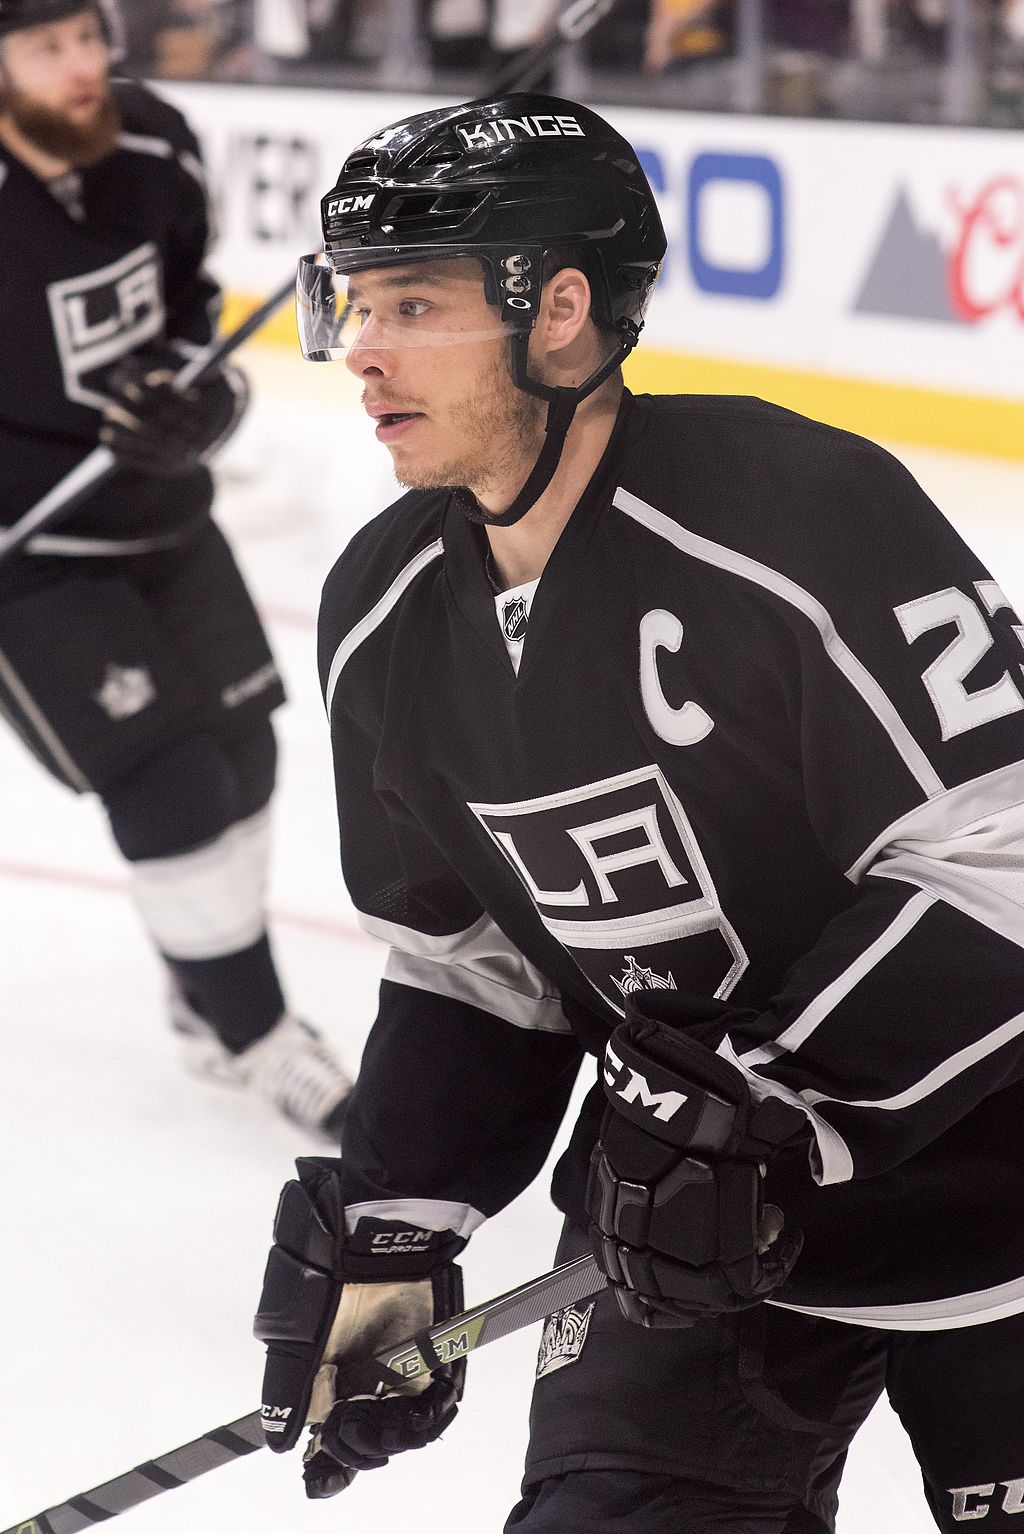 LA Kings: The evolving role of Dustin Brown is critical to rebuild